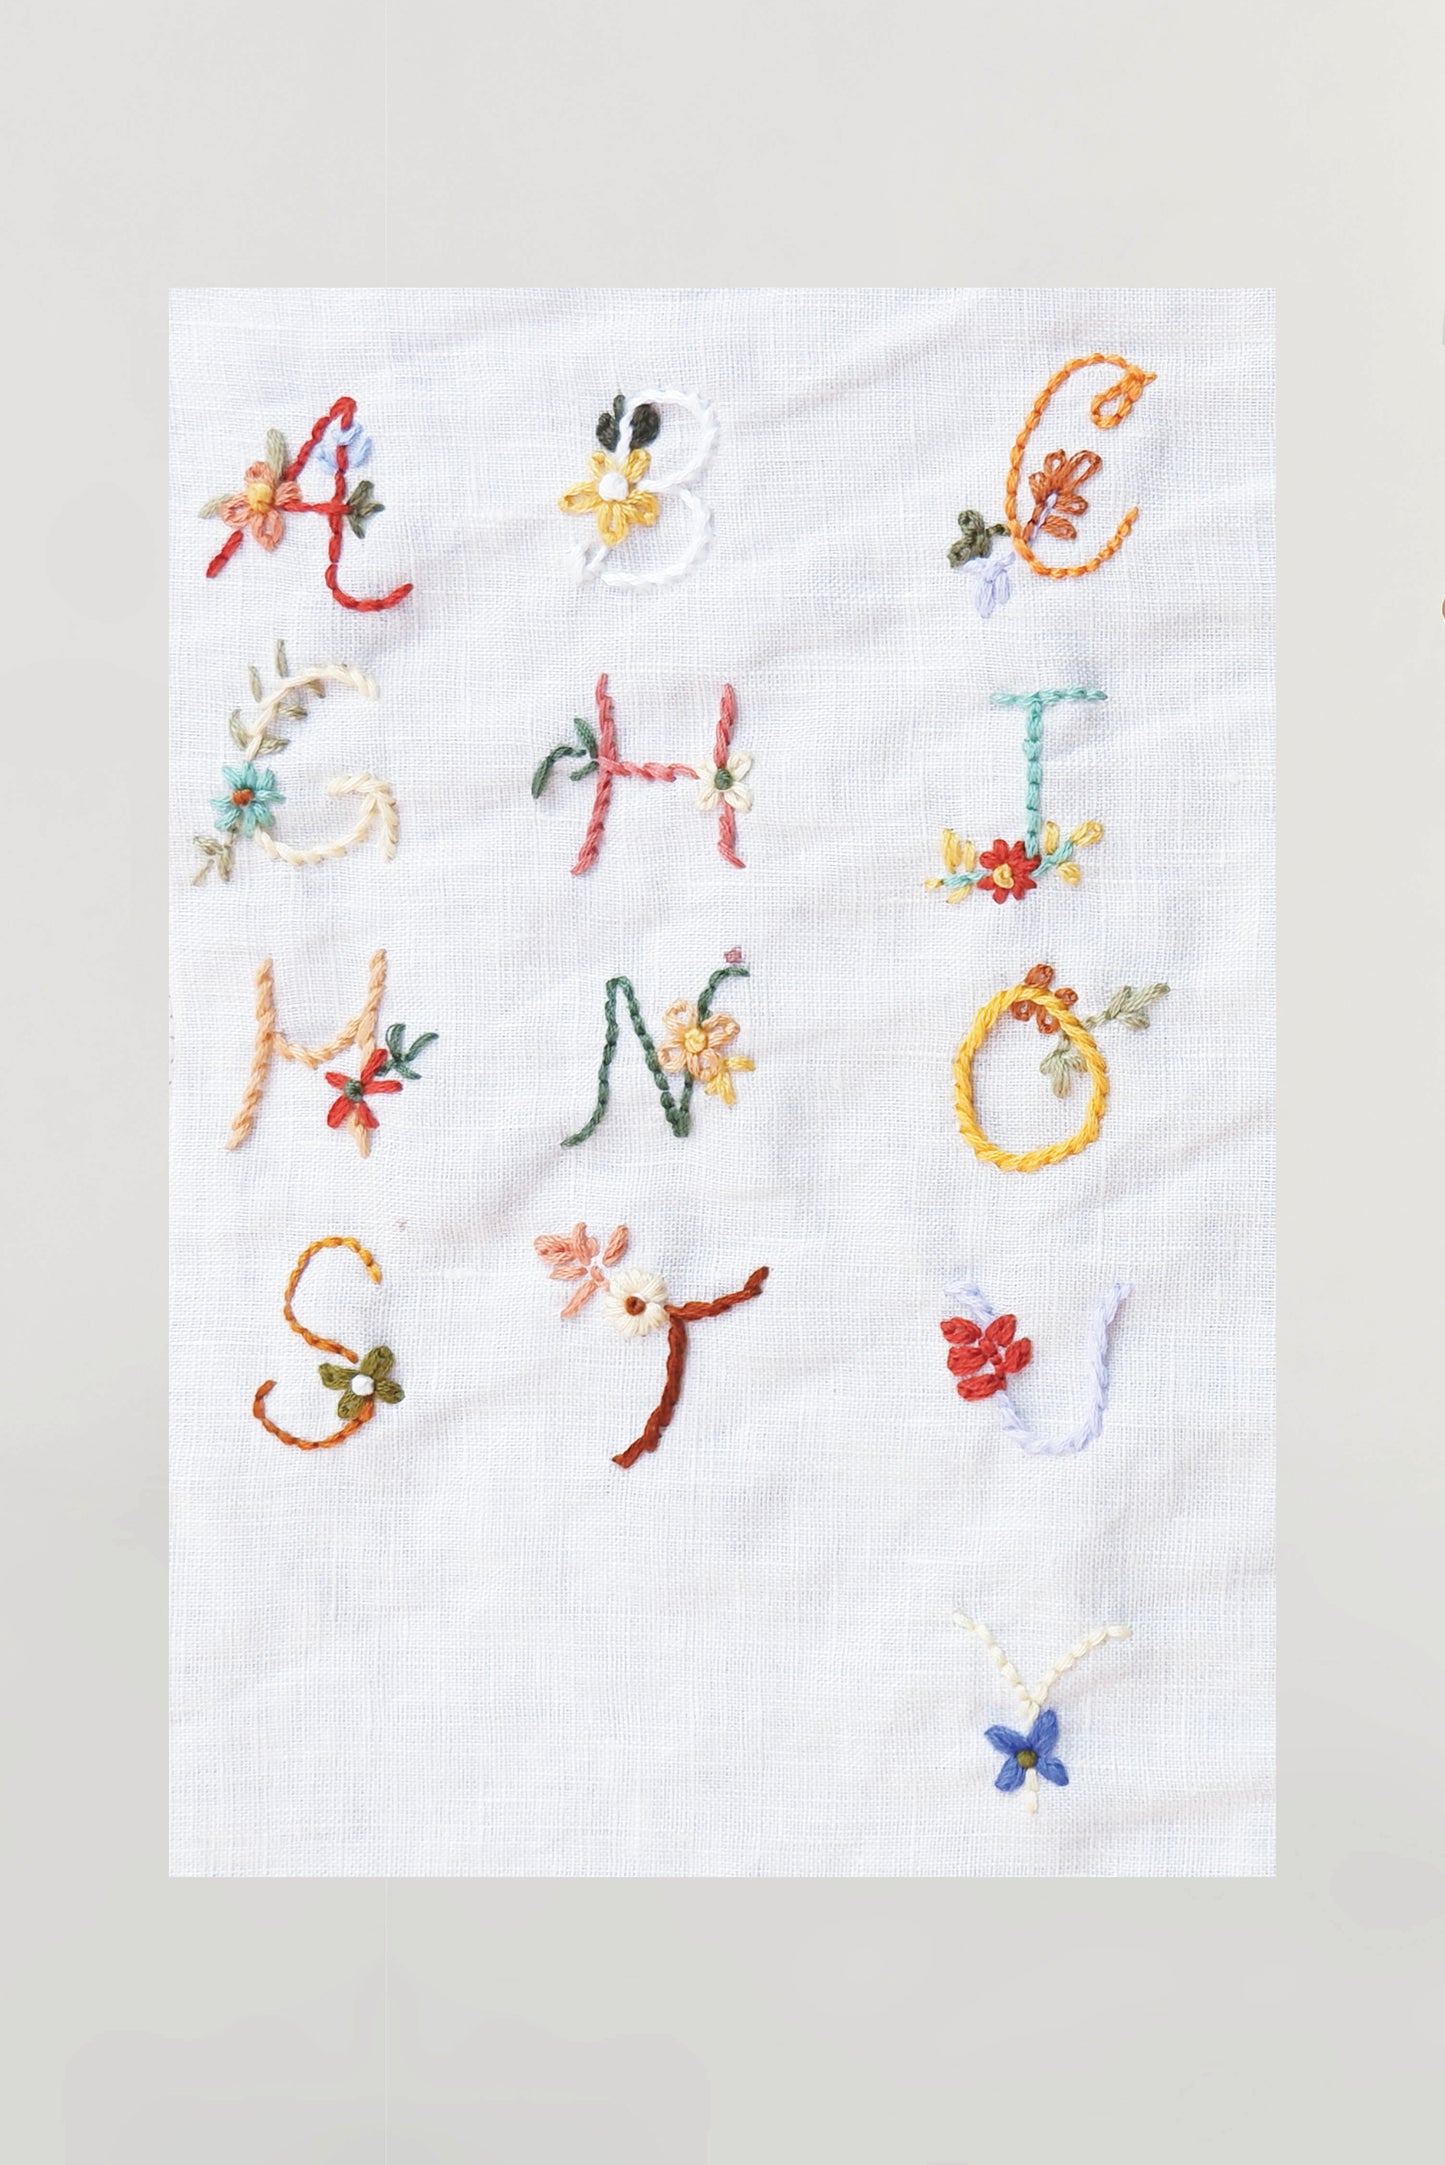 Hand embroidery service - letters